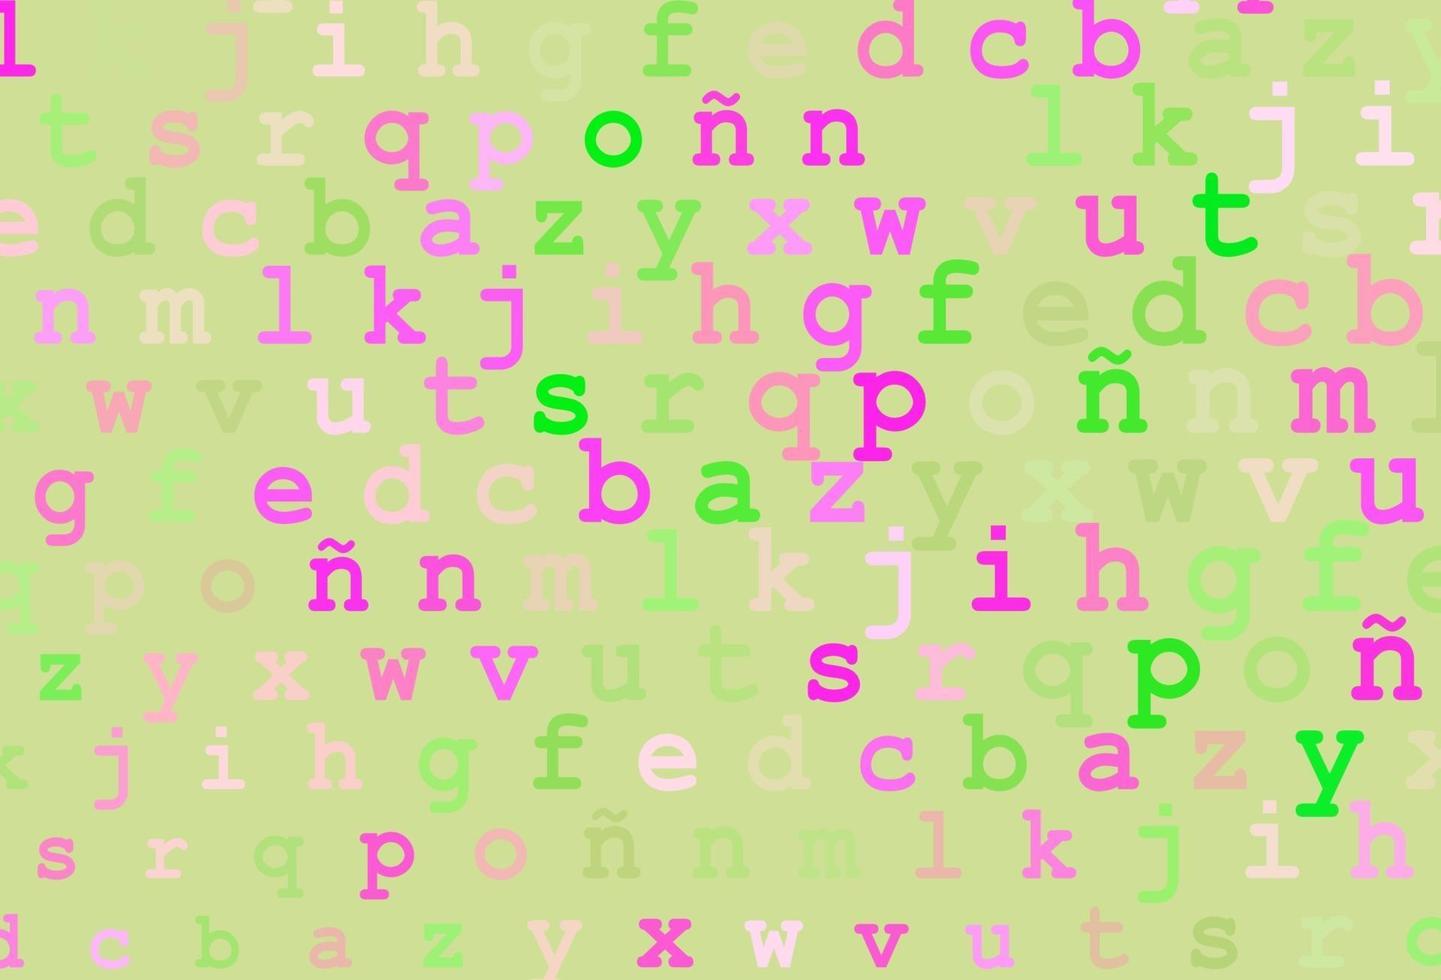 Light pink, green vector texture with ABC characters.